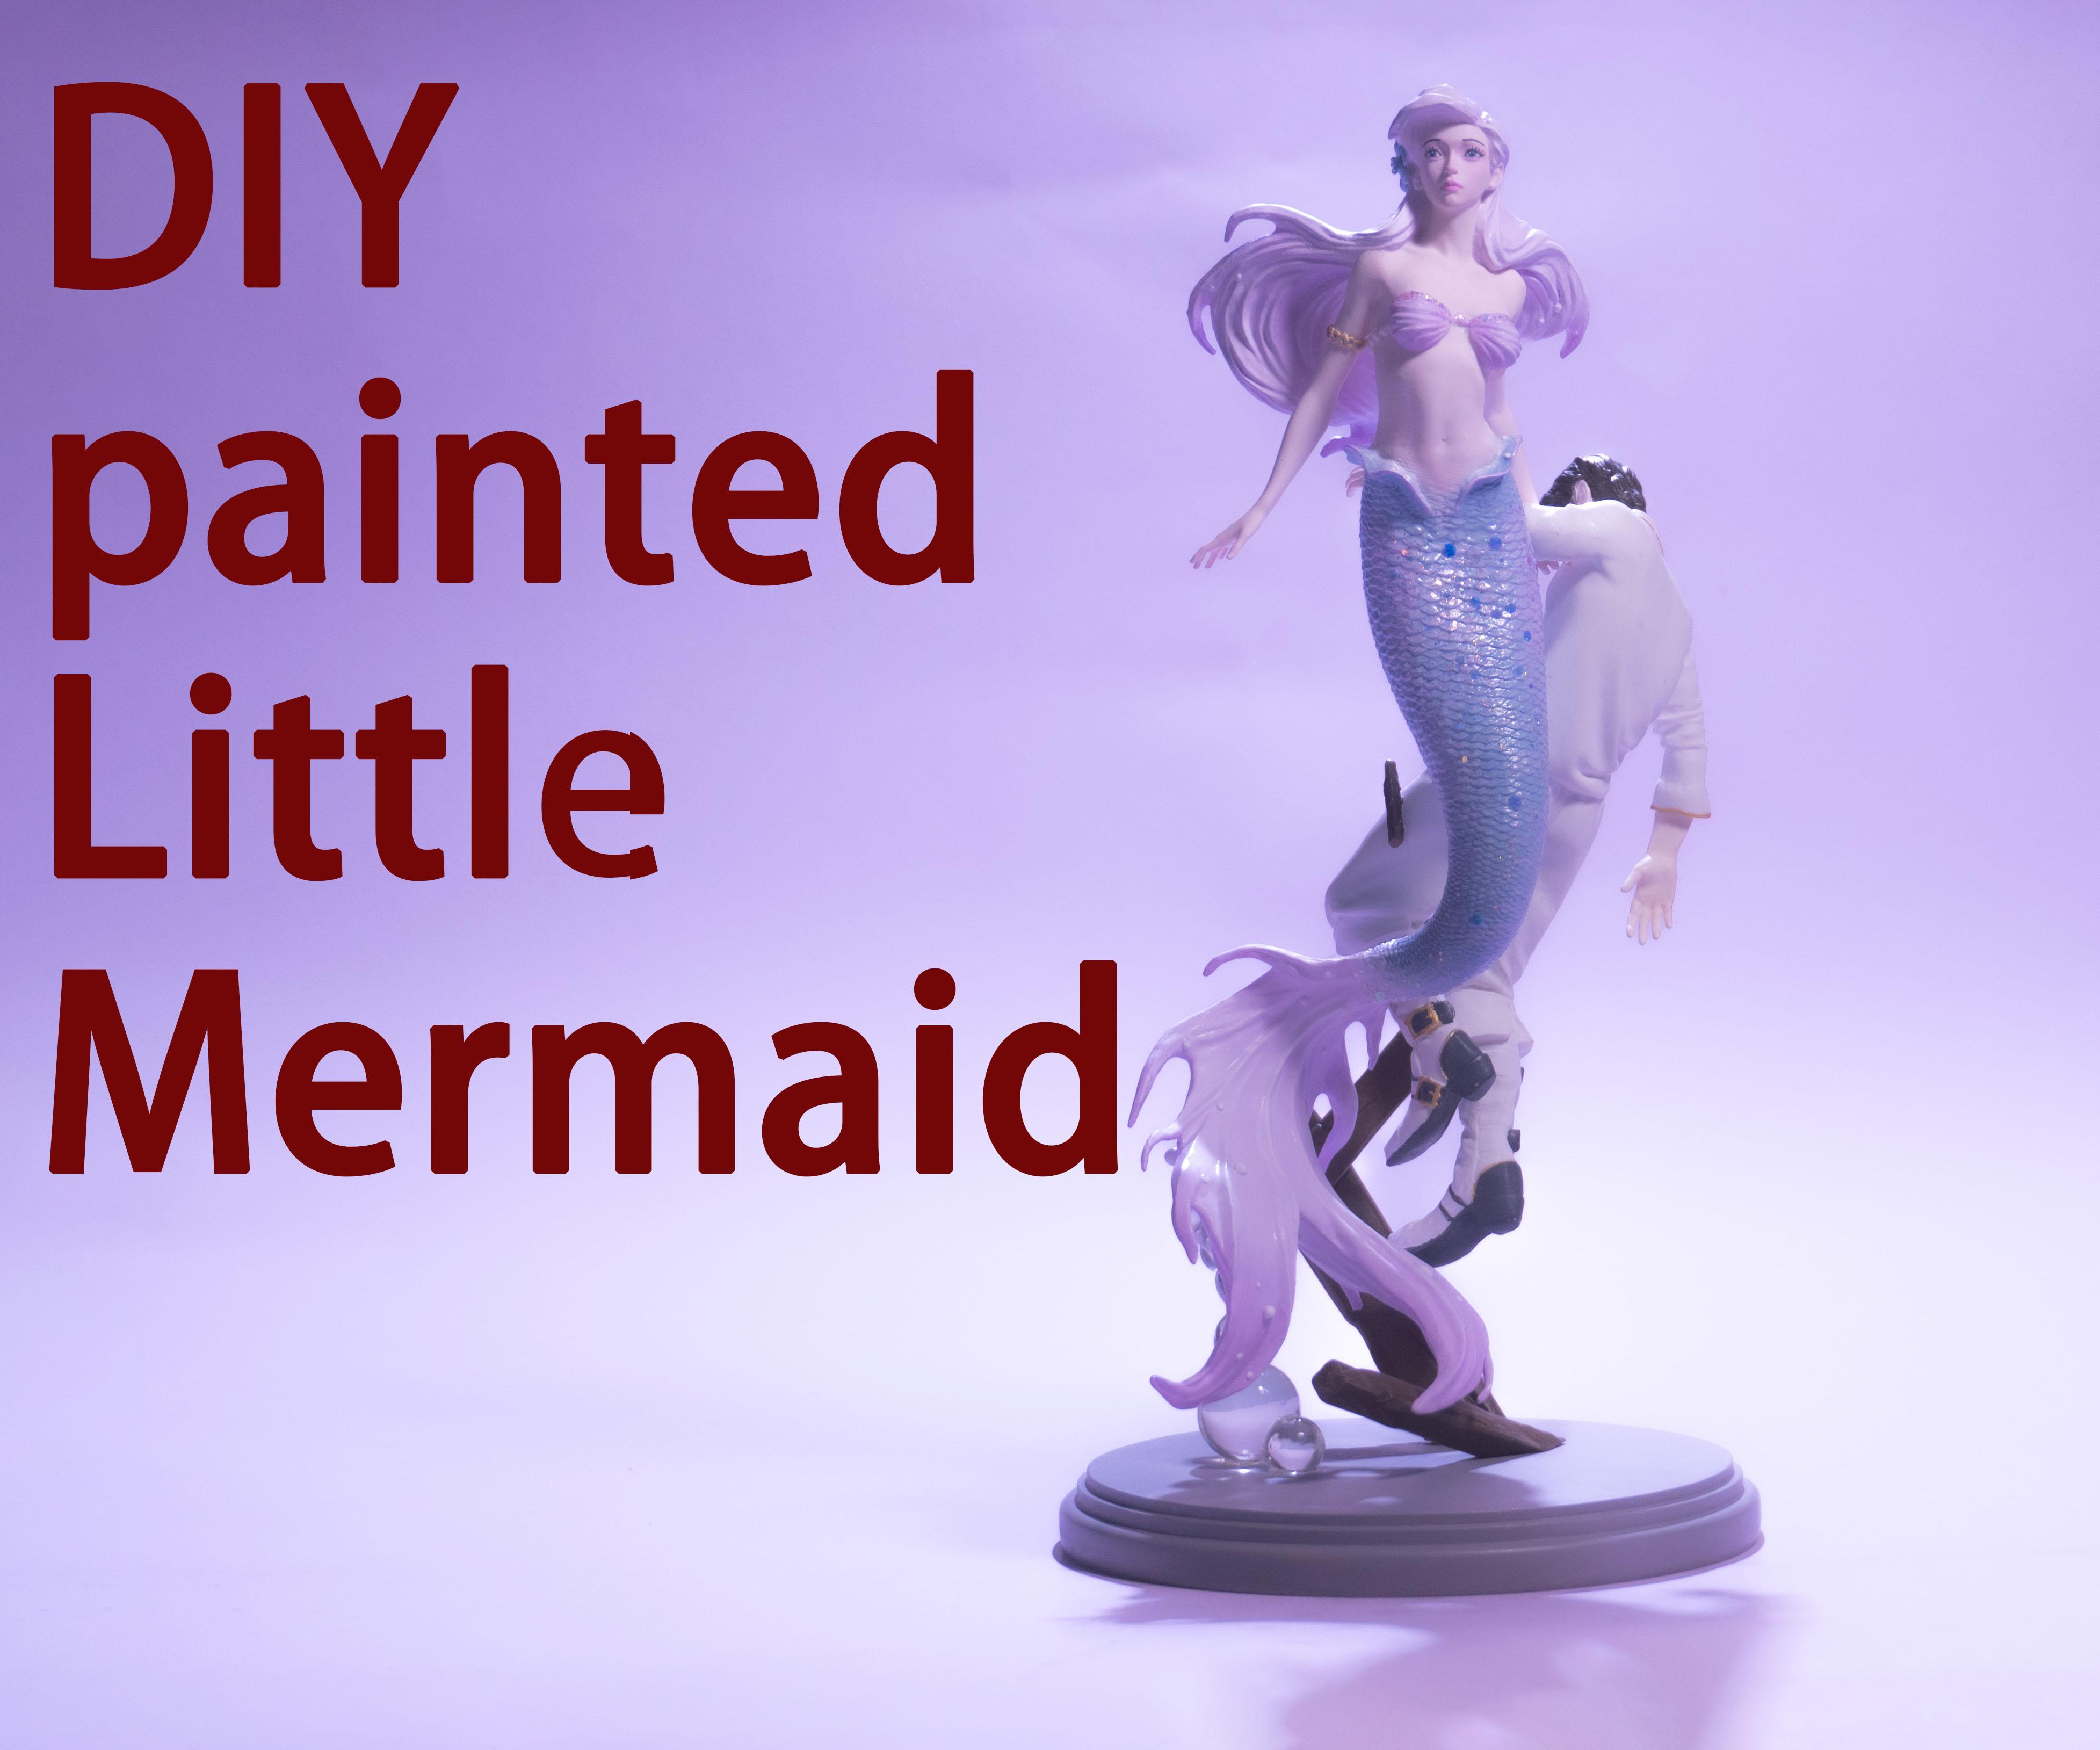 Personalized Painting, Creative DIY: Paint Your Own Little Mermaid Statue！